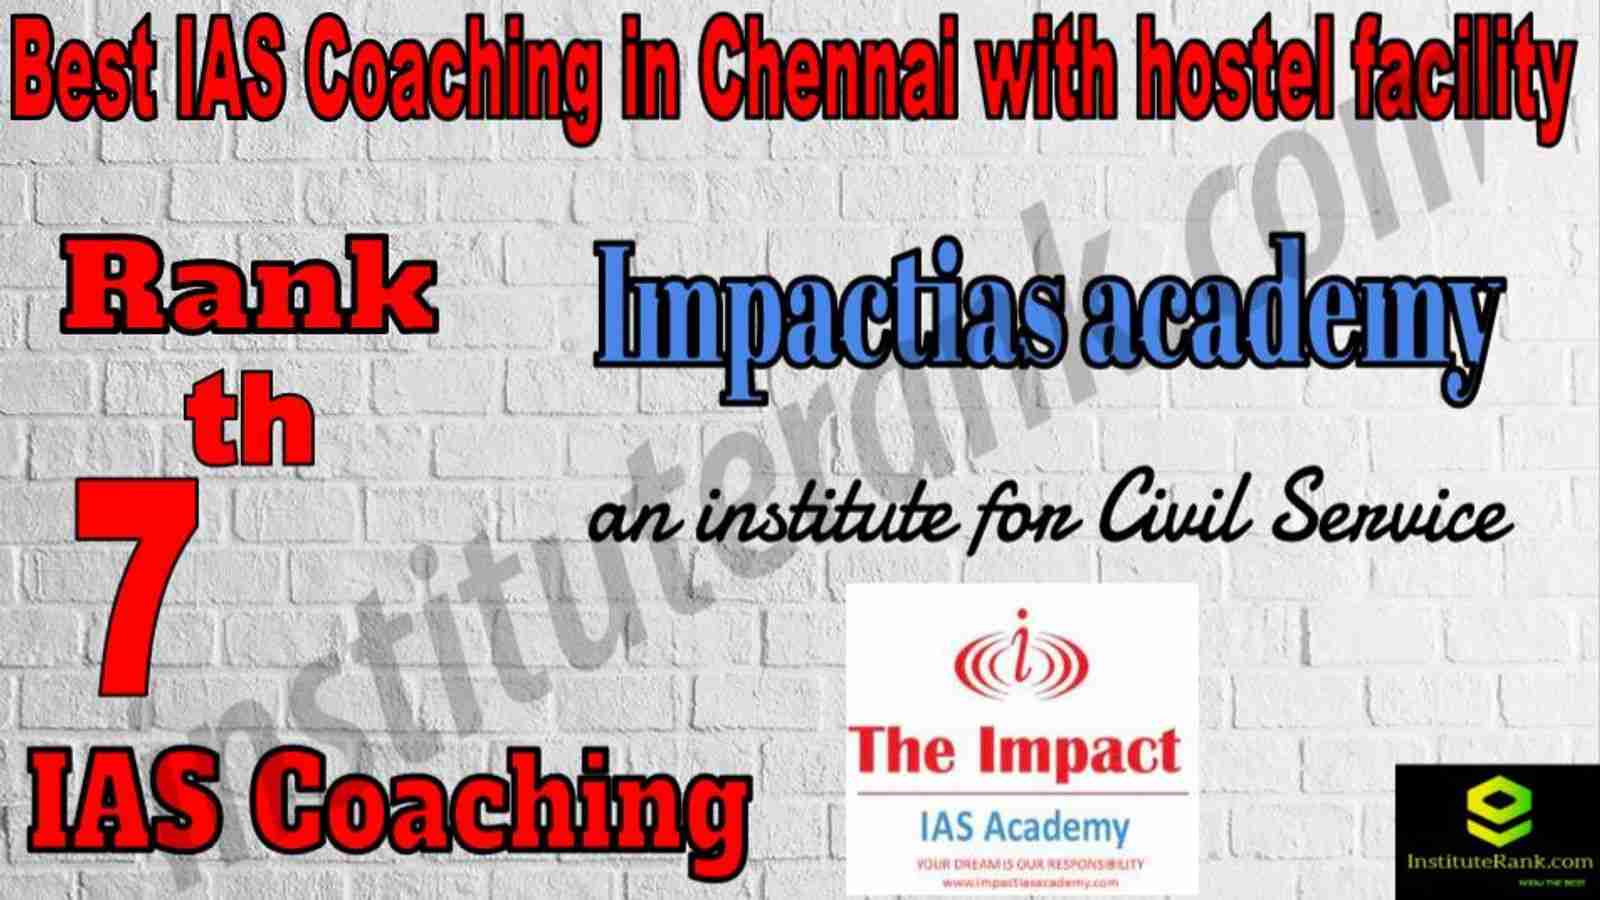 7th Best IAS Coaching in Chennai with hostel facility